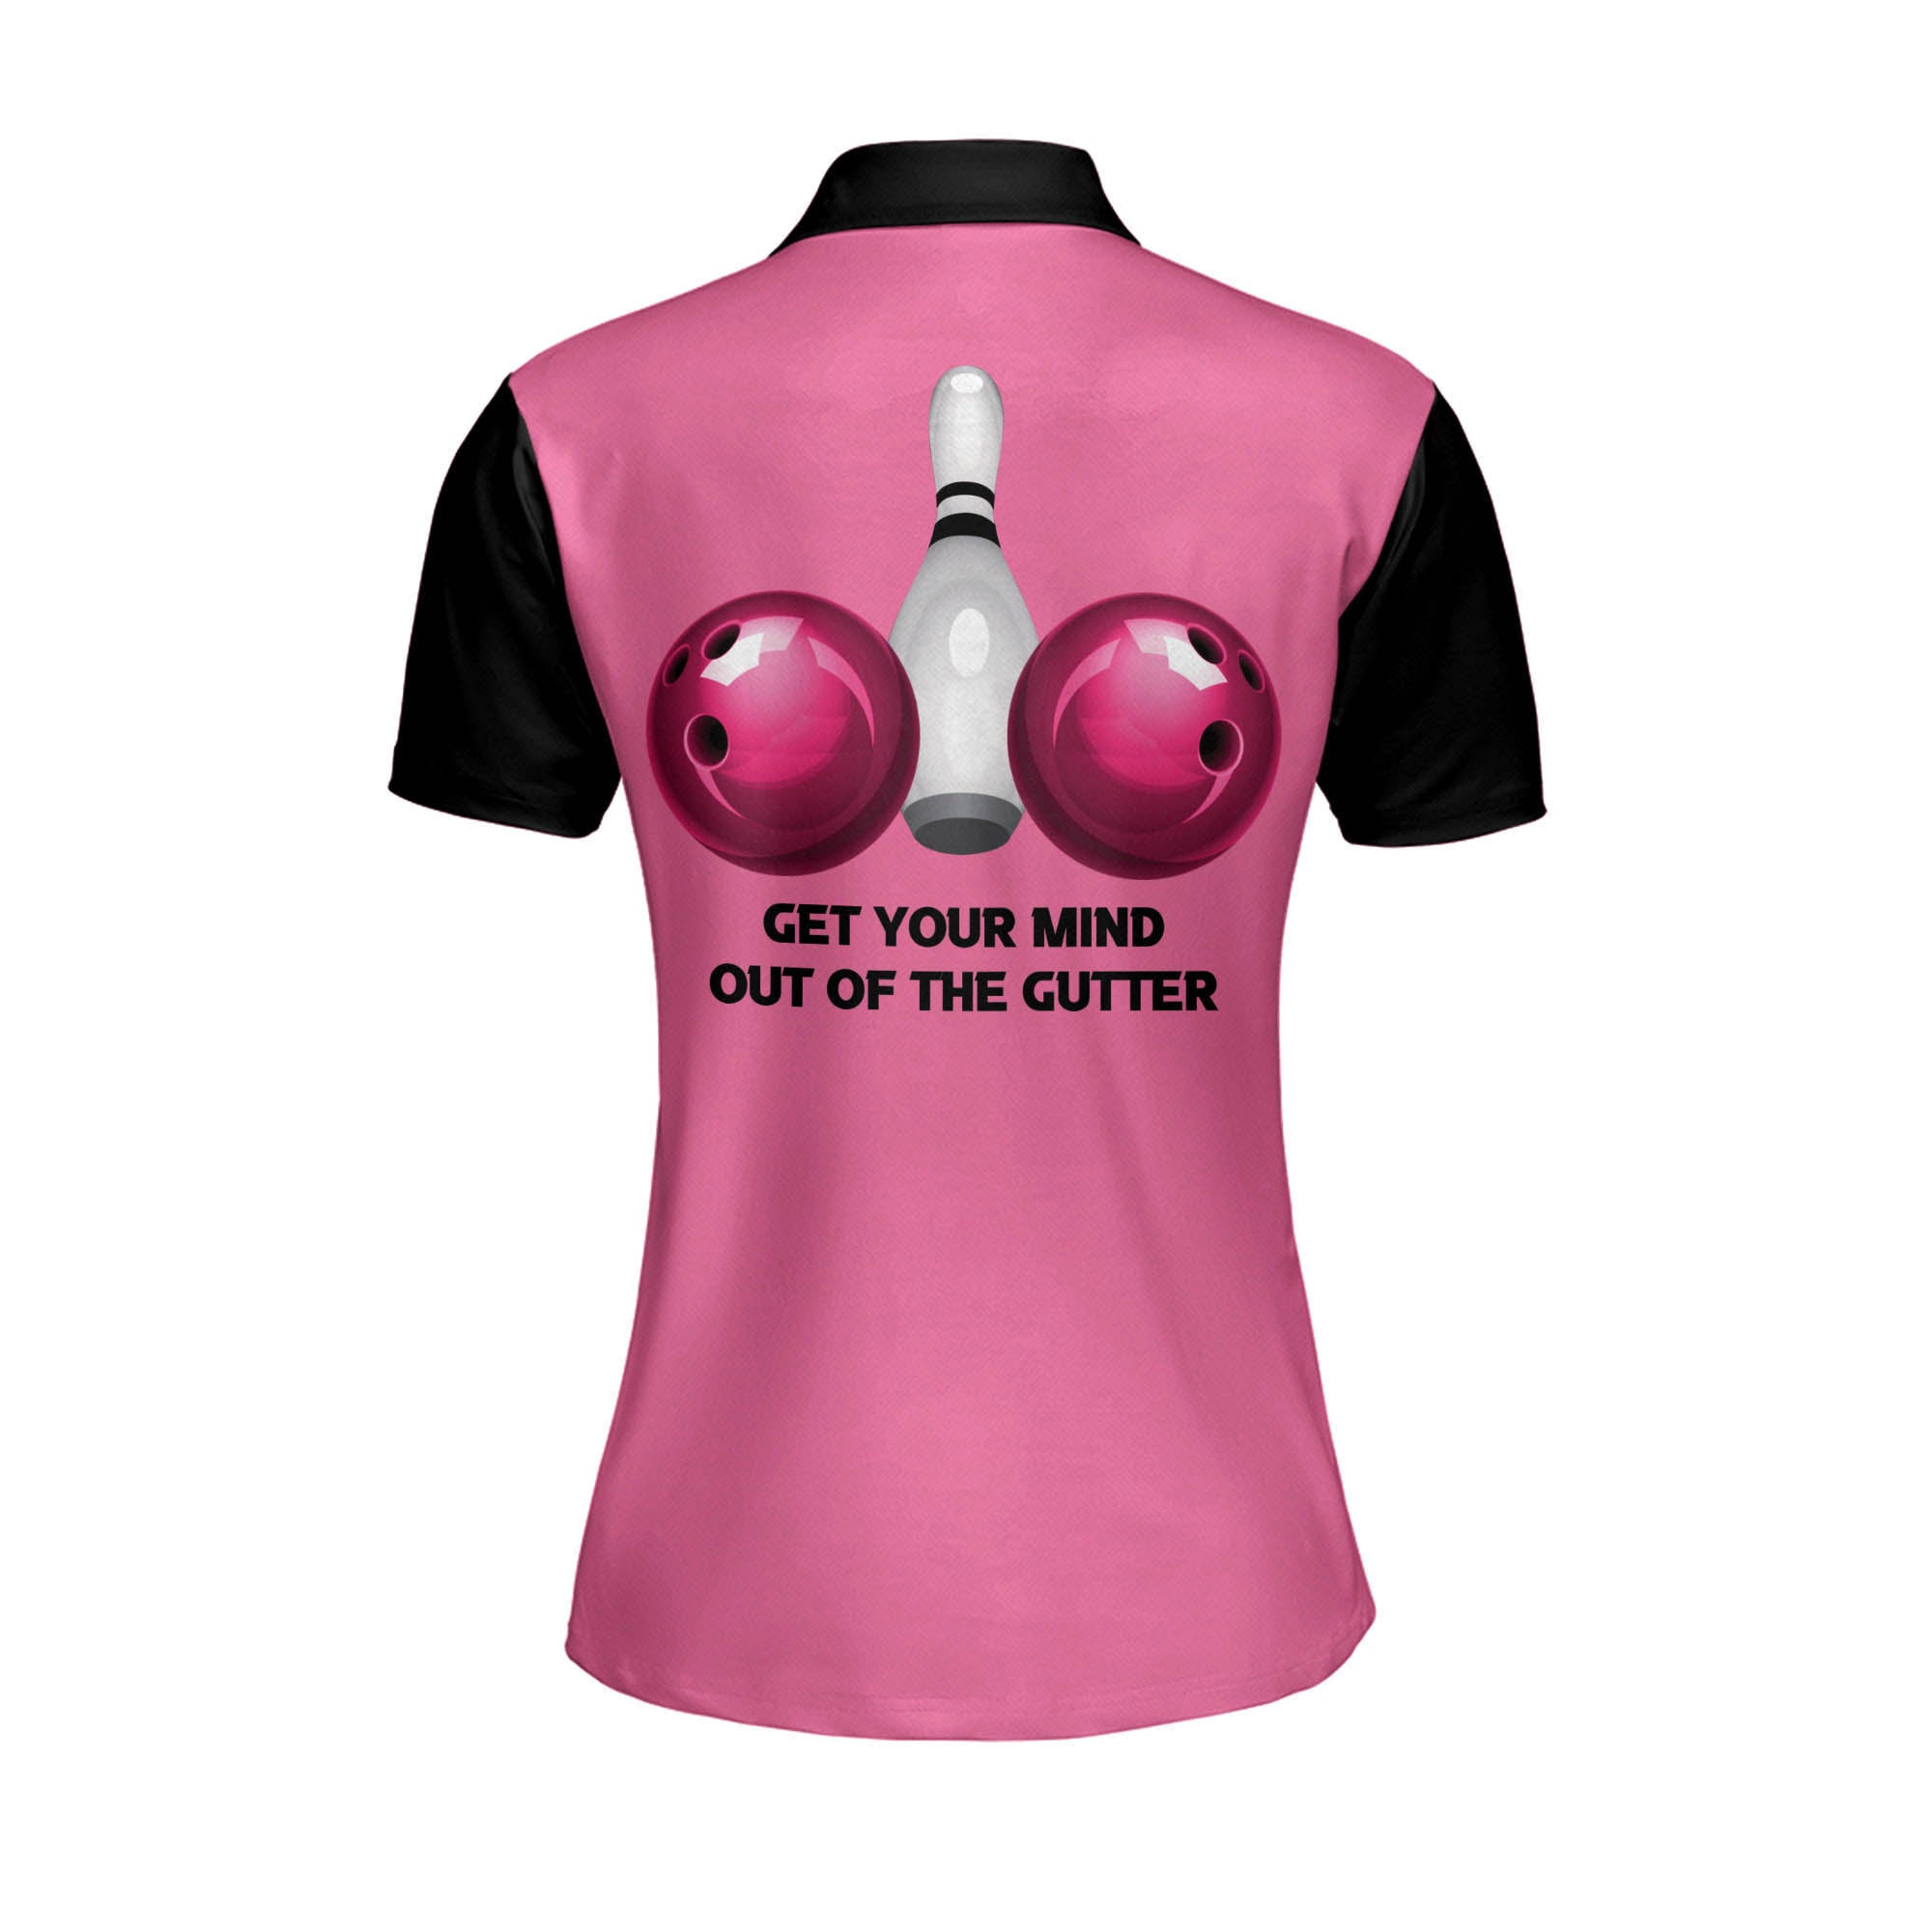 Get Your Mind Out of The Gutter Pink Polo Shirt/ Personalized Bowling Polo Shirt